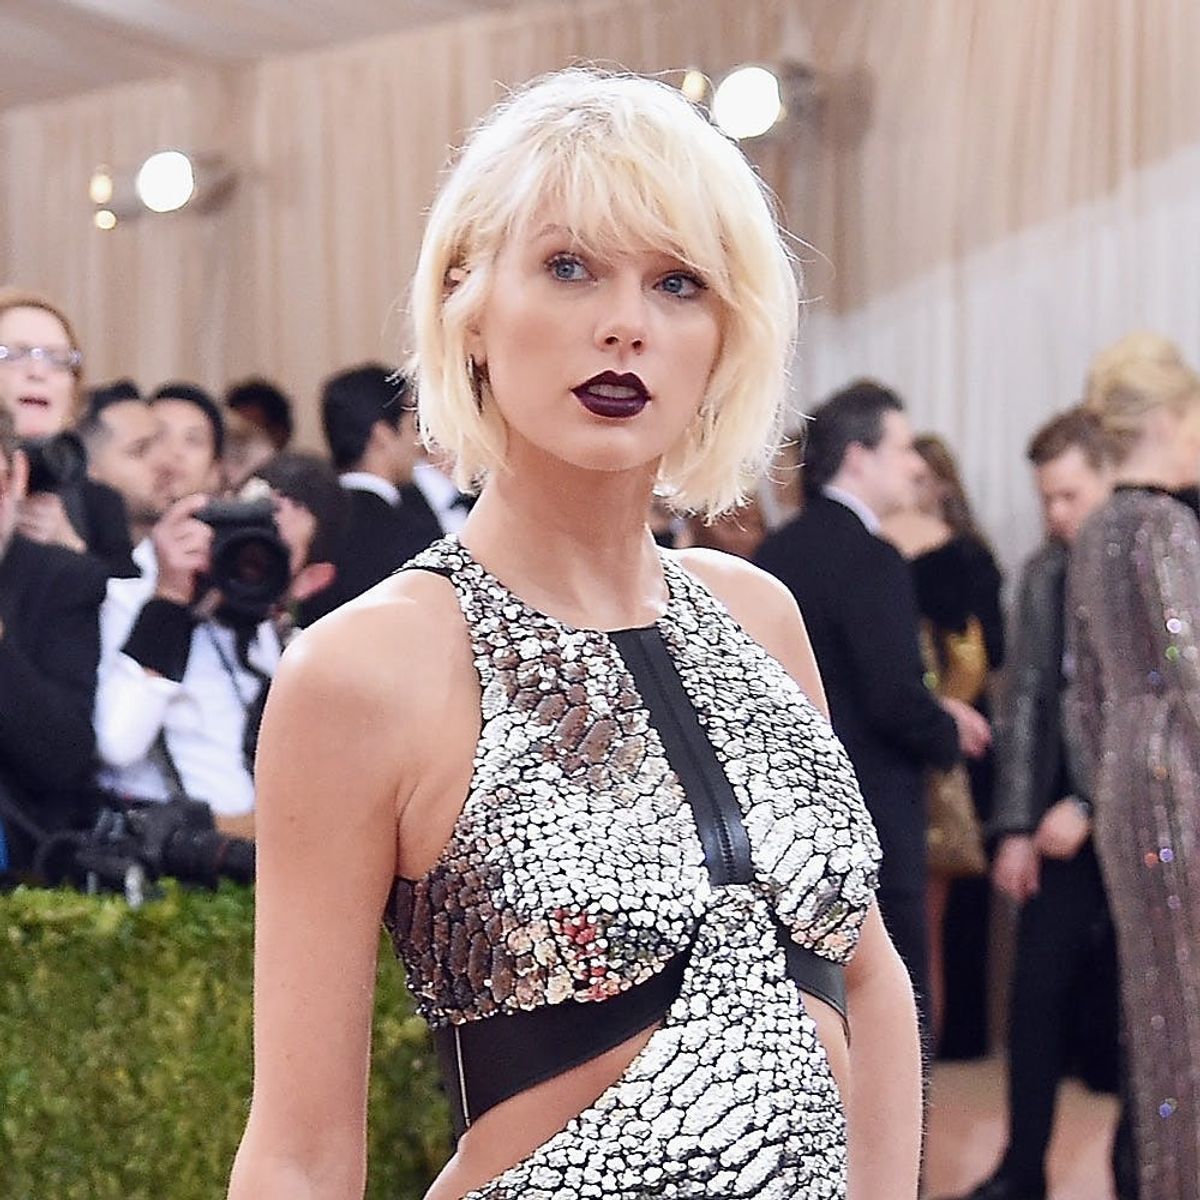 You Won’t Believe How Much Money Taylor Swift Made Last Year